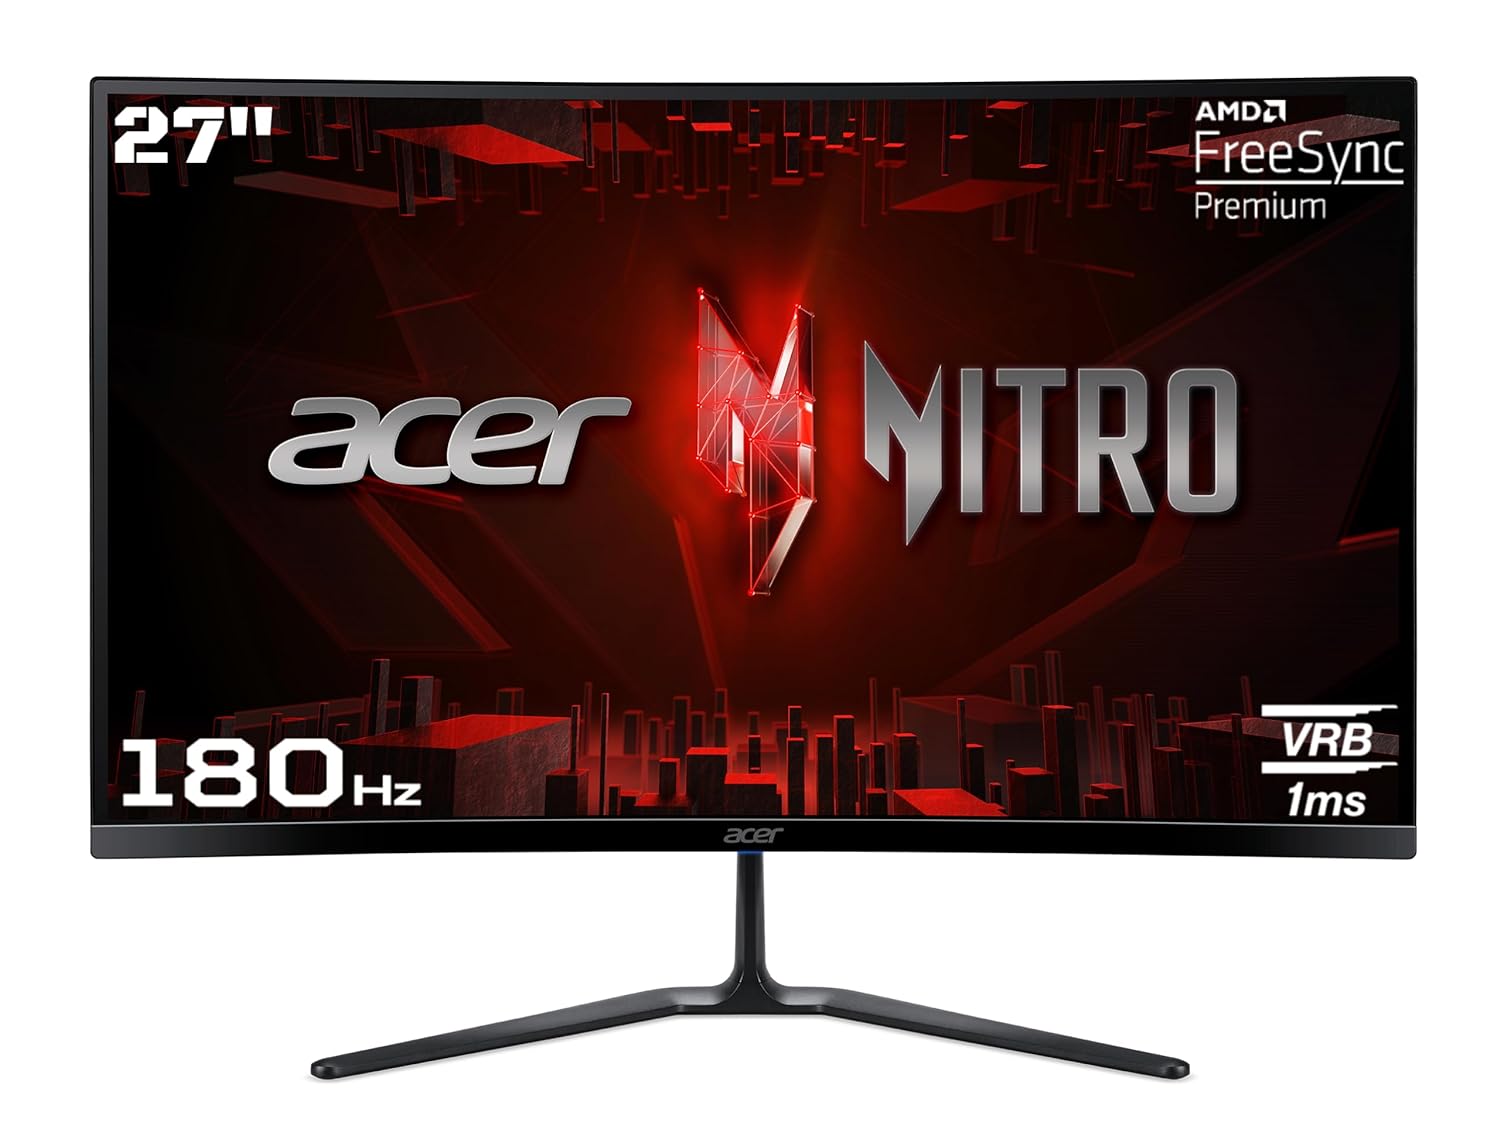 Acer ED270R S3 27 Inch (68.58 Cm) Full HD 1500 R Curved Gaming LCD Monitor with LED Back Light I 1MS VRB, 180Hz Refresh Rate I AMD Freesync Premium I 2 x HDMI 1 x Display Port I HDR 10 I Black